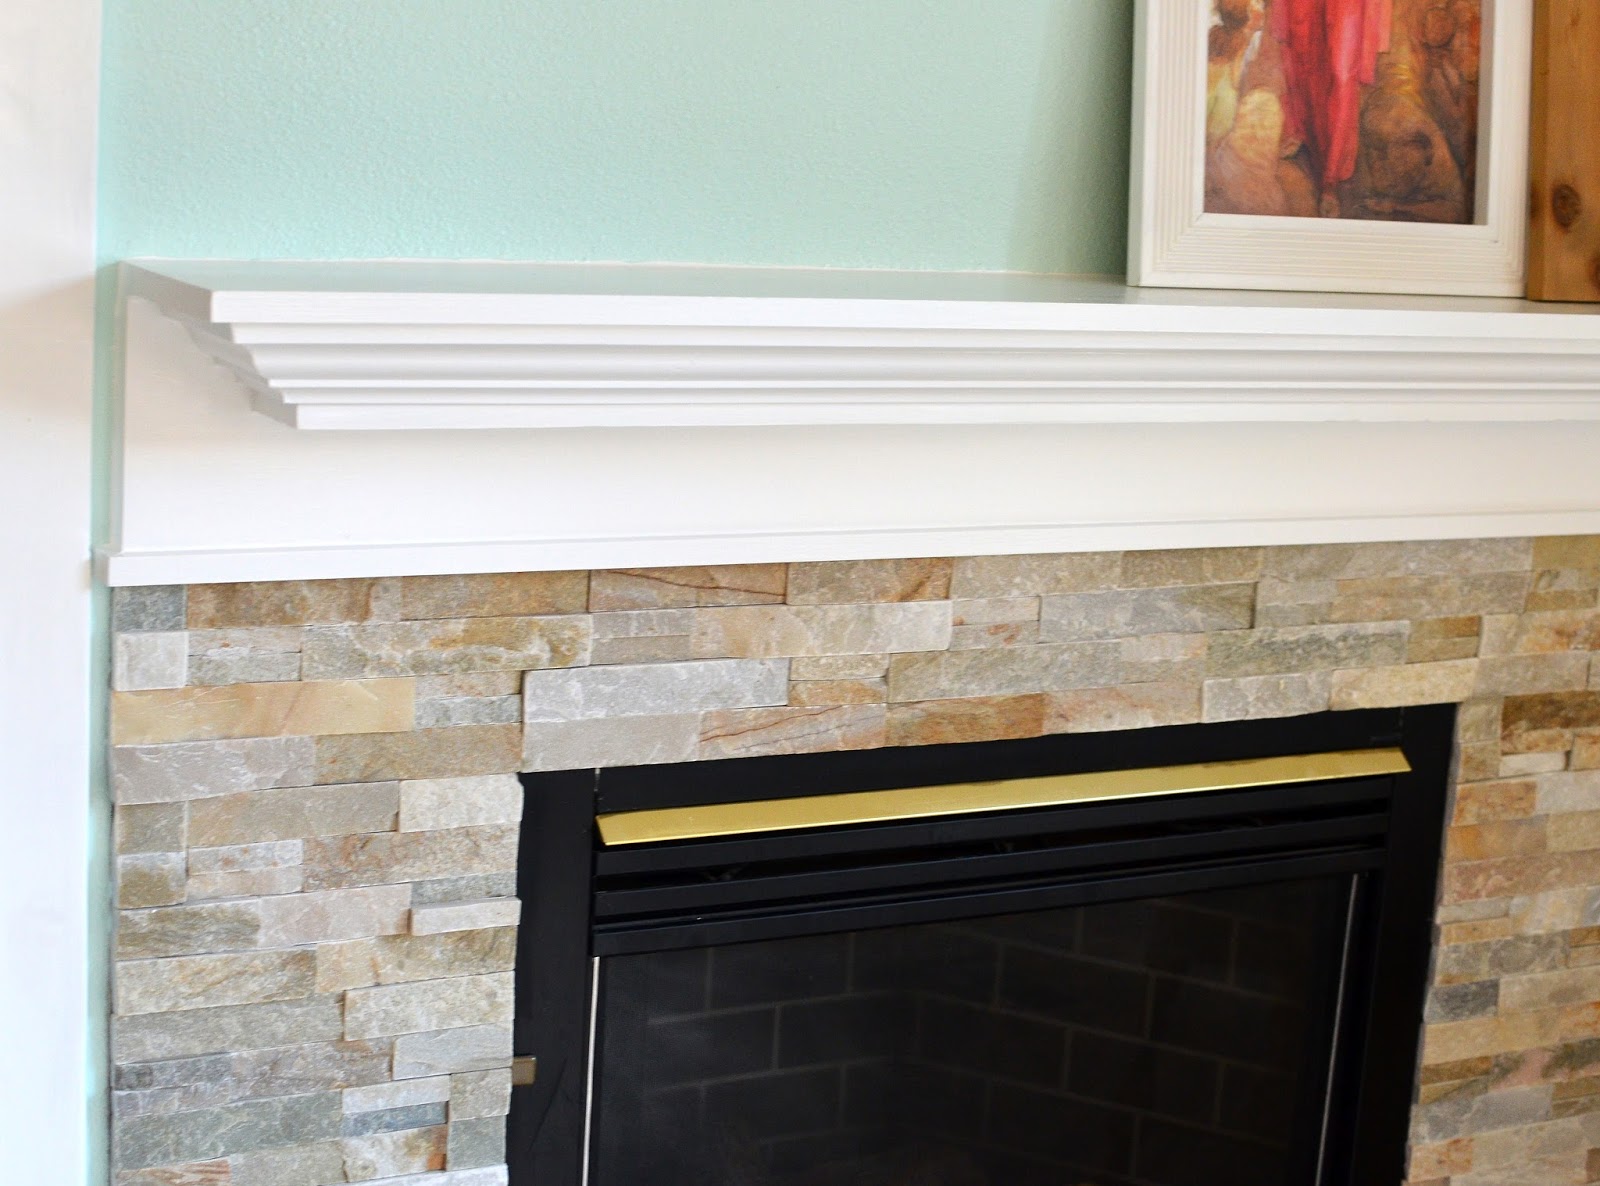 fire place update with stone and white mantel